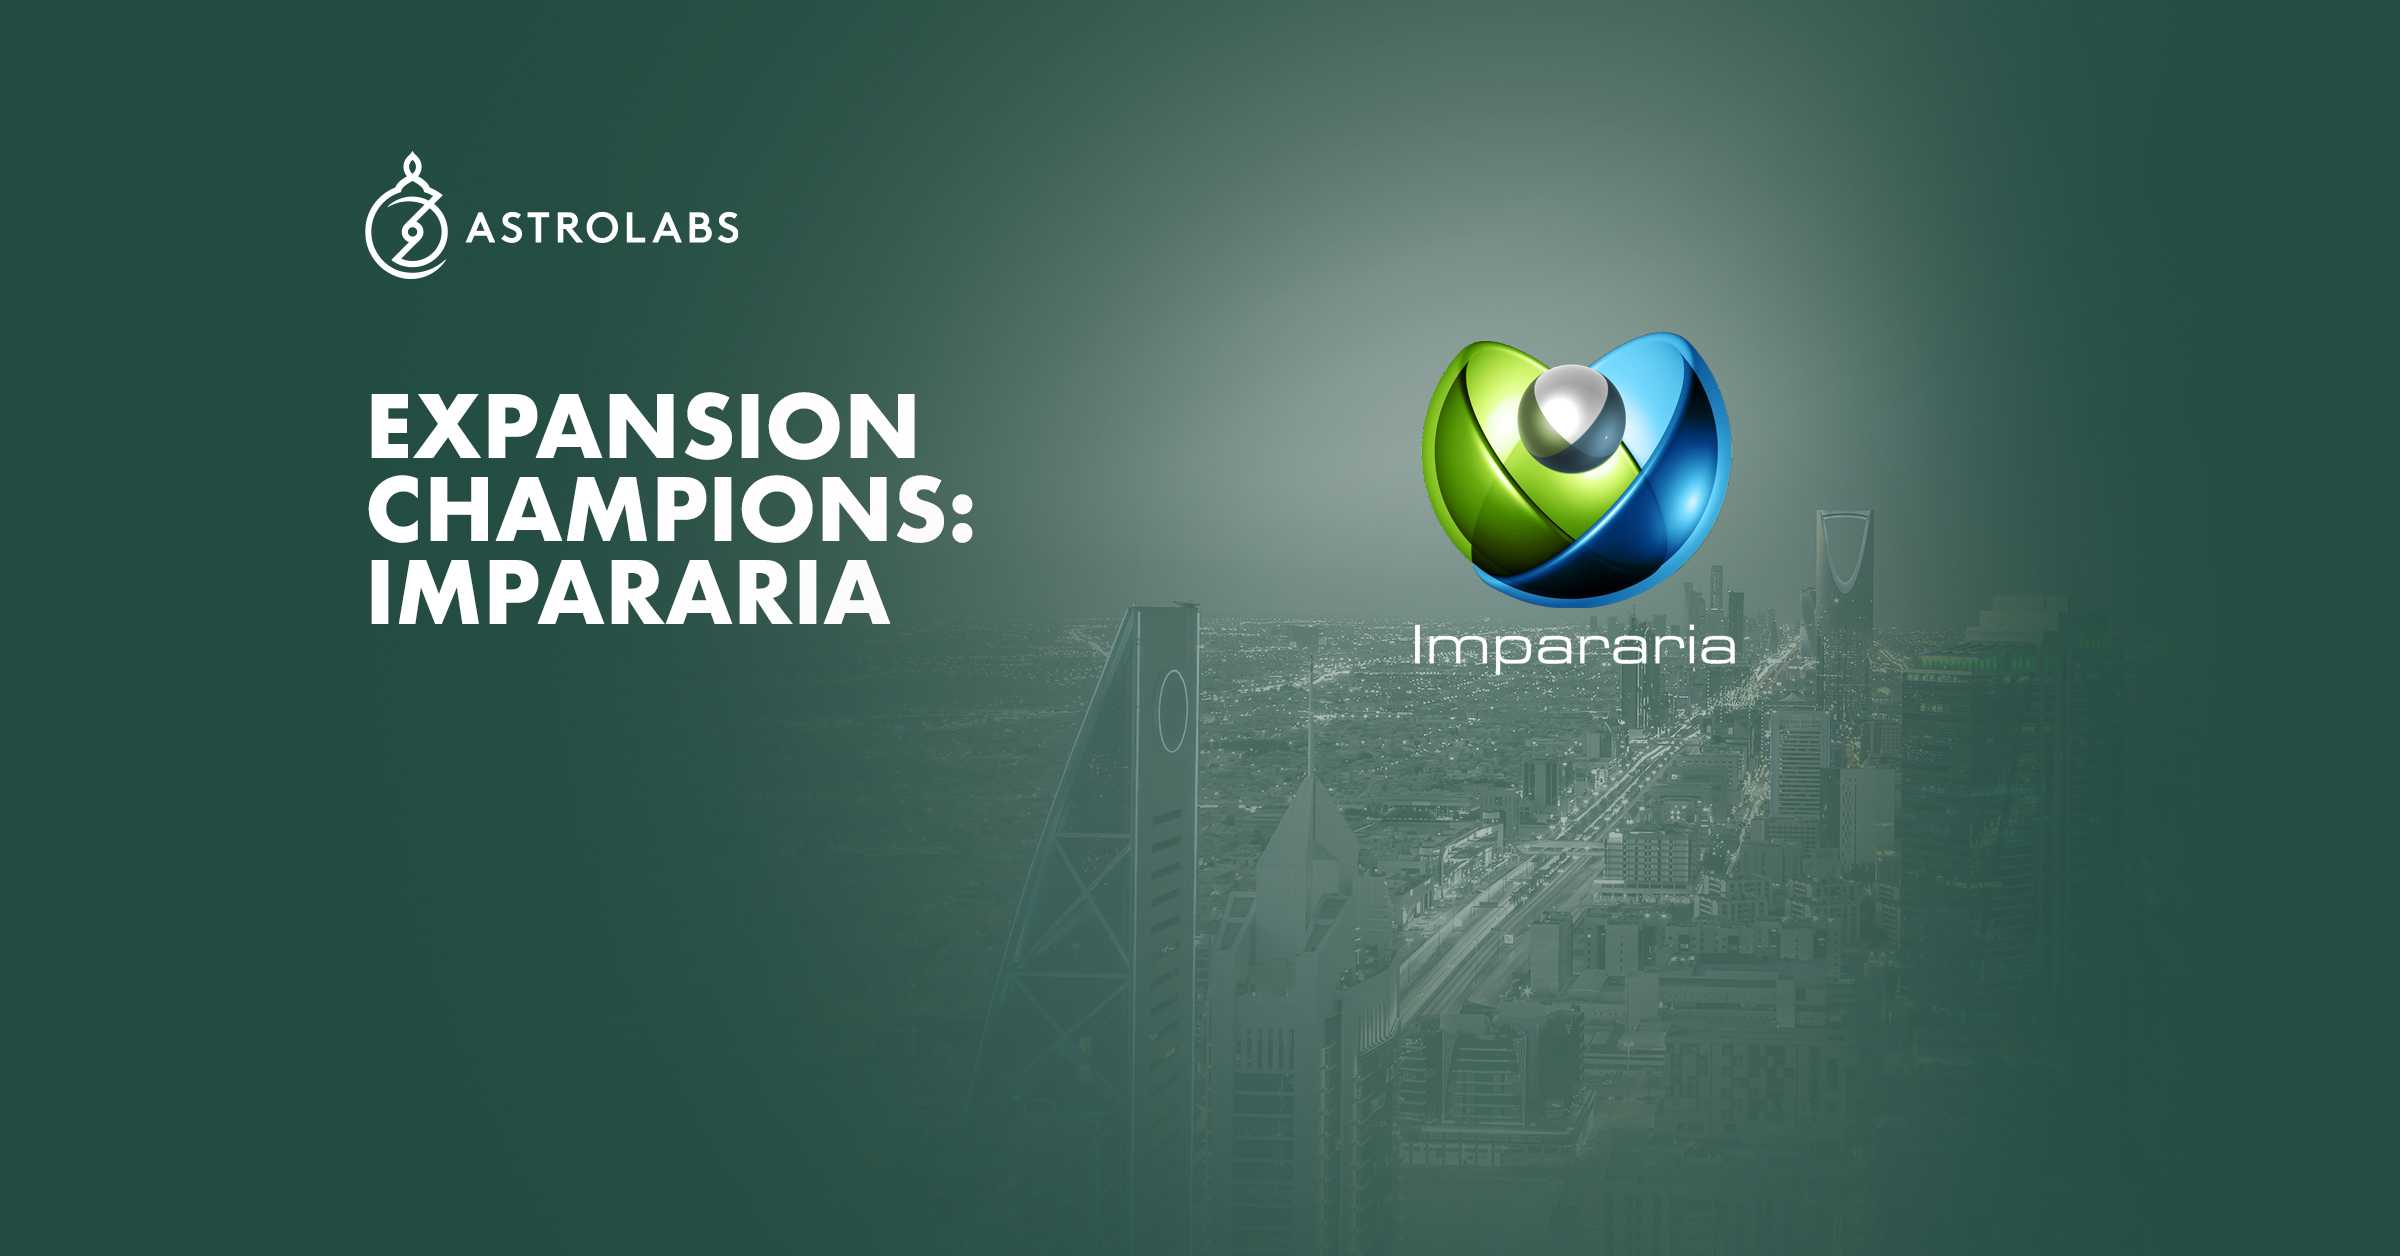 Expansion Champions: Impararia - On aligned visions and disruptive technologies